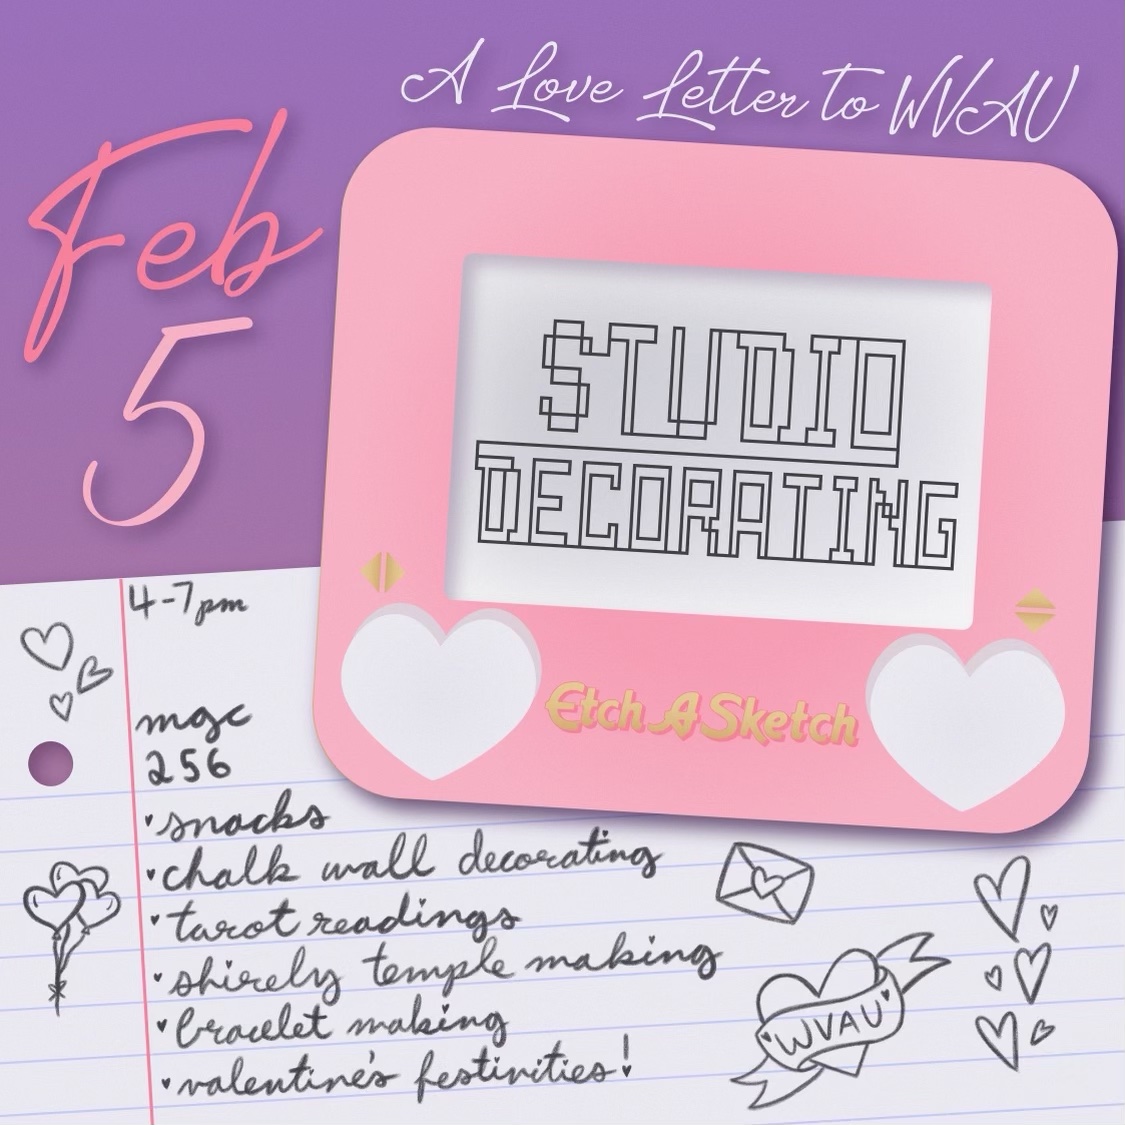 Graphic that reads "A Love Letter to WVAU Studio Decorating Feb 5 4-7pm MGC 256 - snacks - chalk wall decorating - tarot readings - shirley temple making - bracelet making - valentine's festivities!